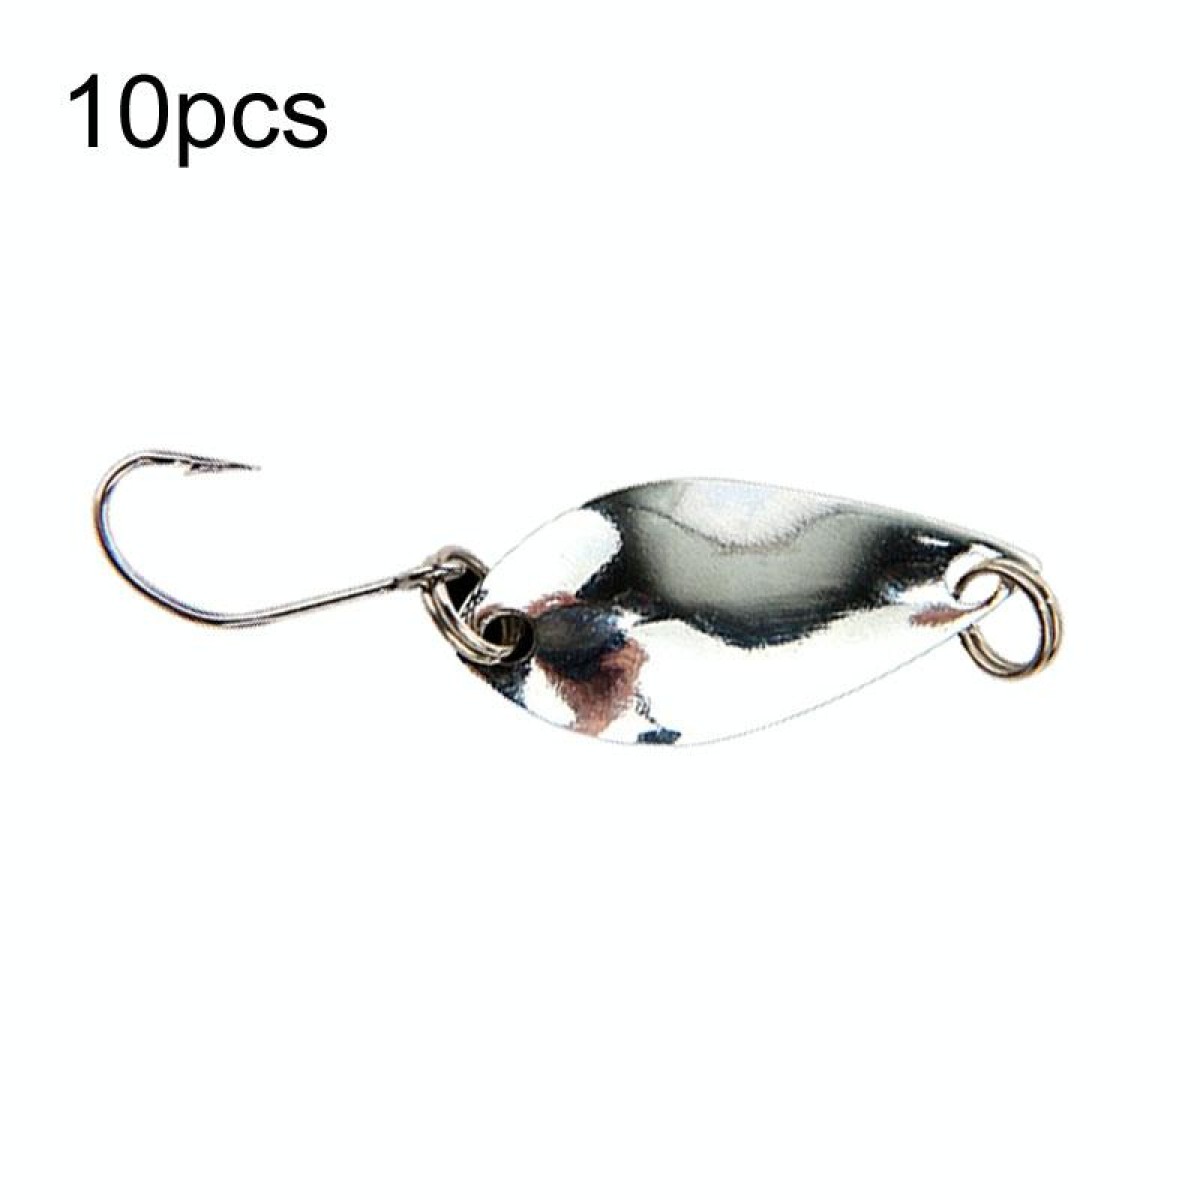 10pcs 2.5g Single Hook Spoon Type Horse Mouth Melon Sequins False Lures Fishing Lures(Silver)